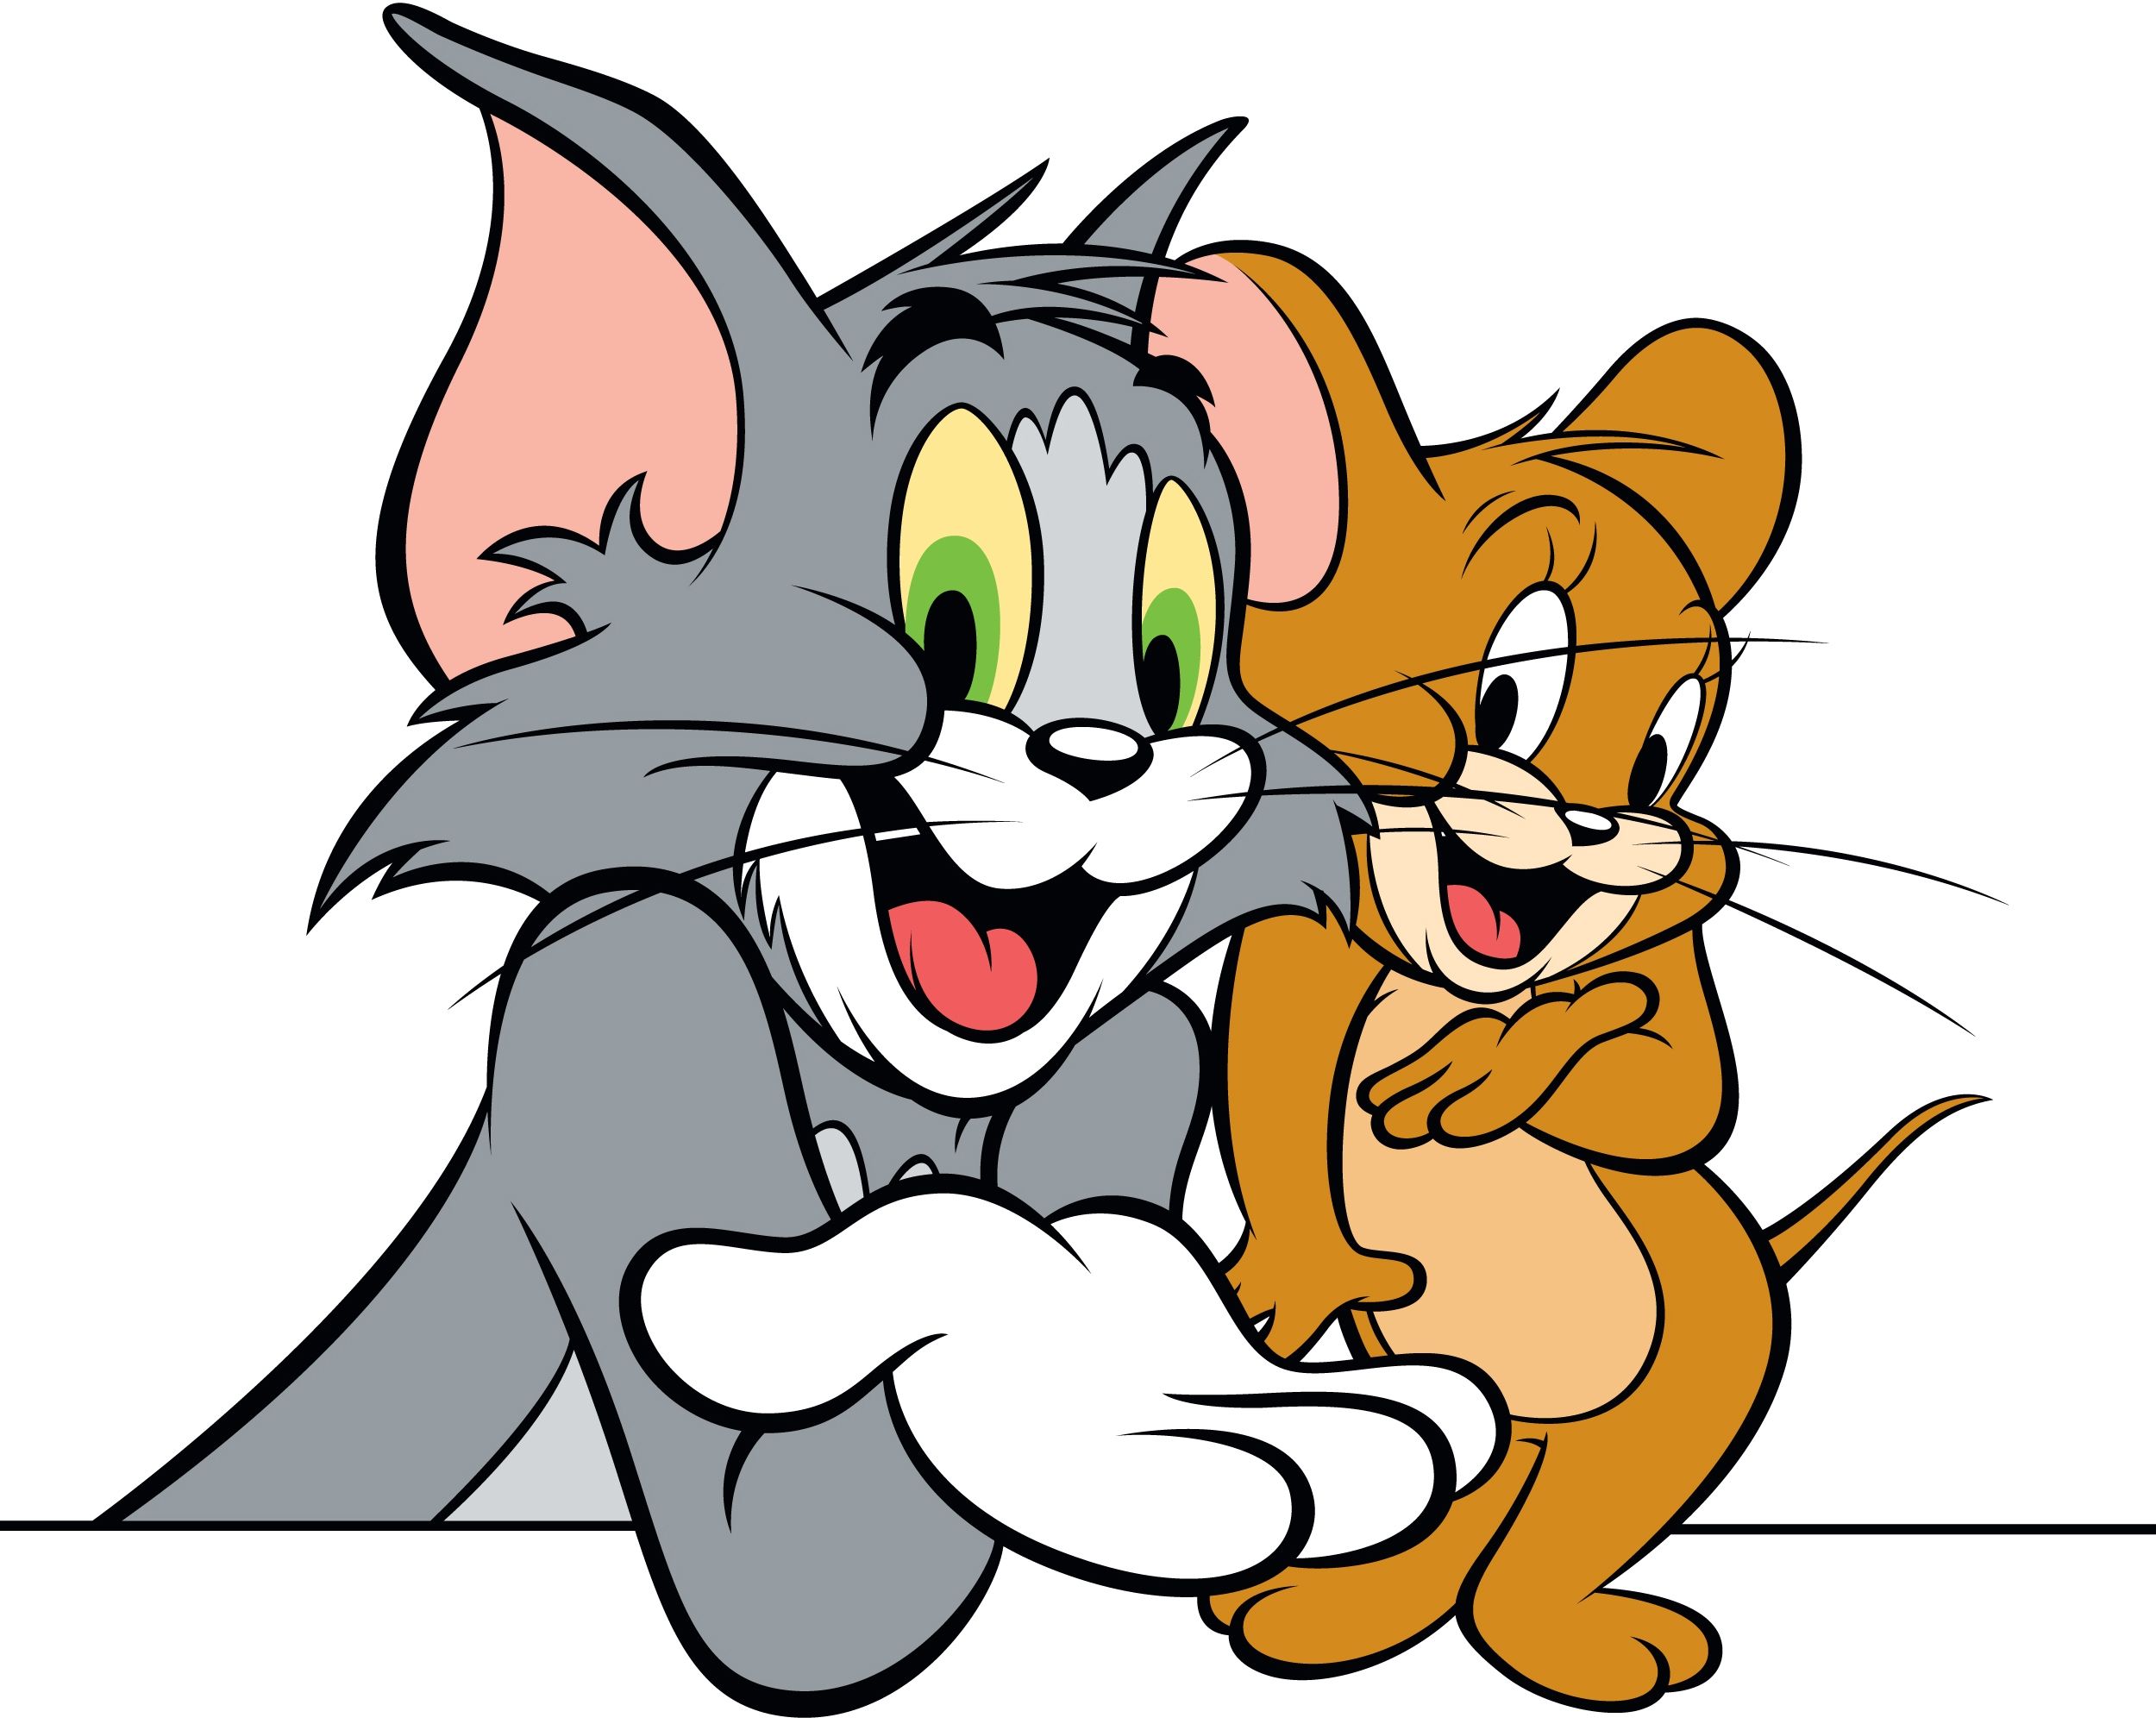 tom and jerry best friends free hd wallpaper in 2019.